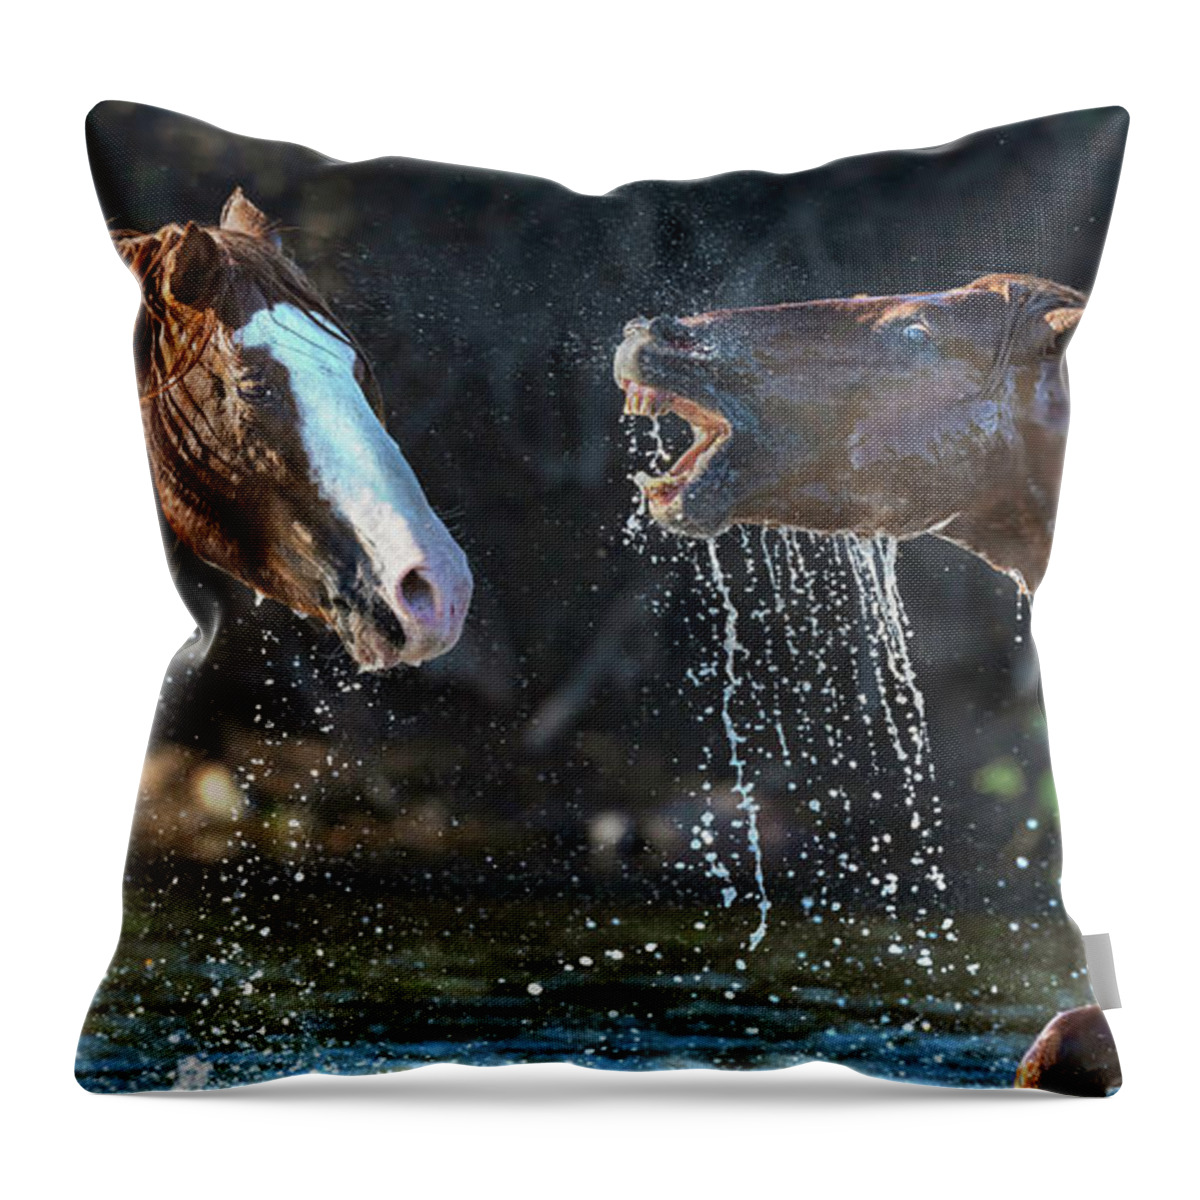 Stallion Throw Pillow featuring the photograph Agitated Stallion. by Paul Martin